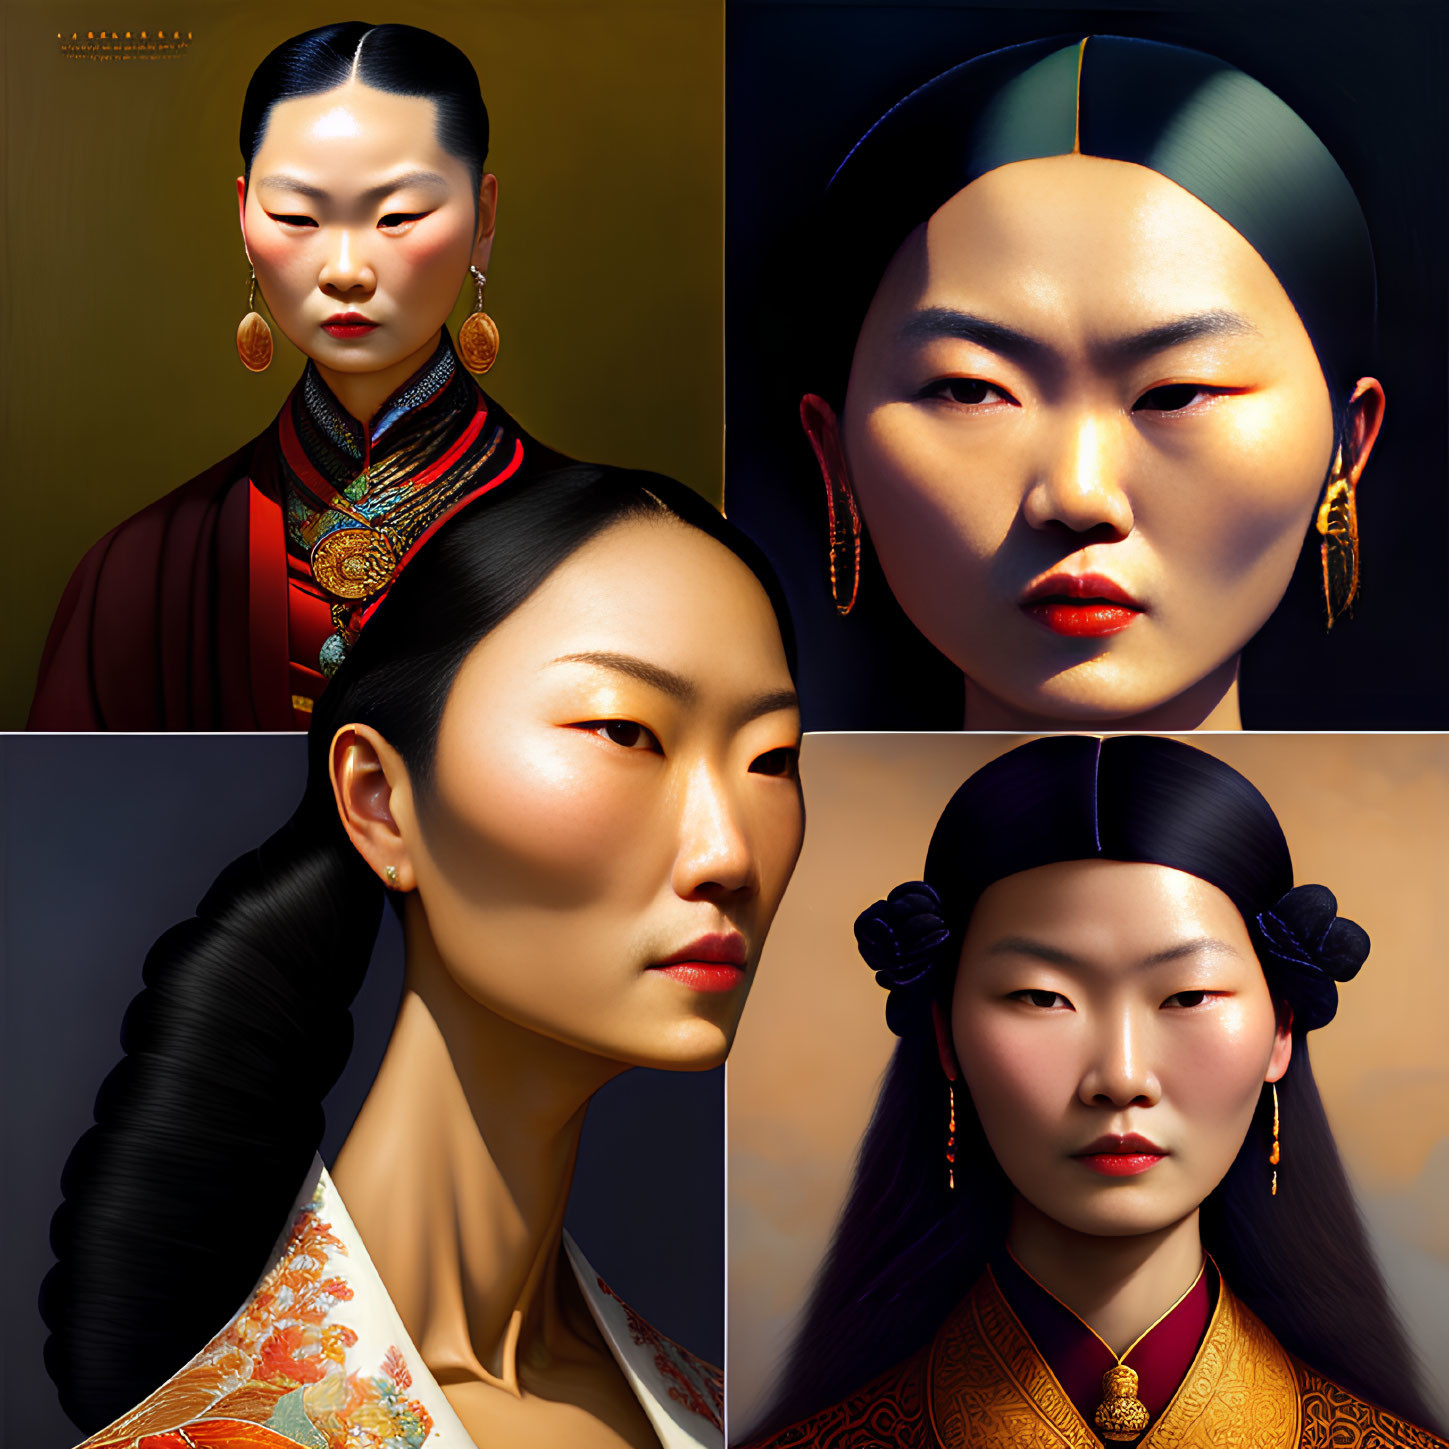 Four Portraits of Woman in Traditional East Asian Attire and Makeup